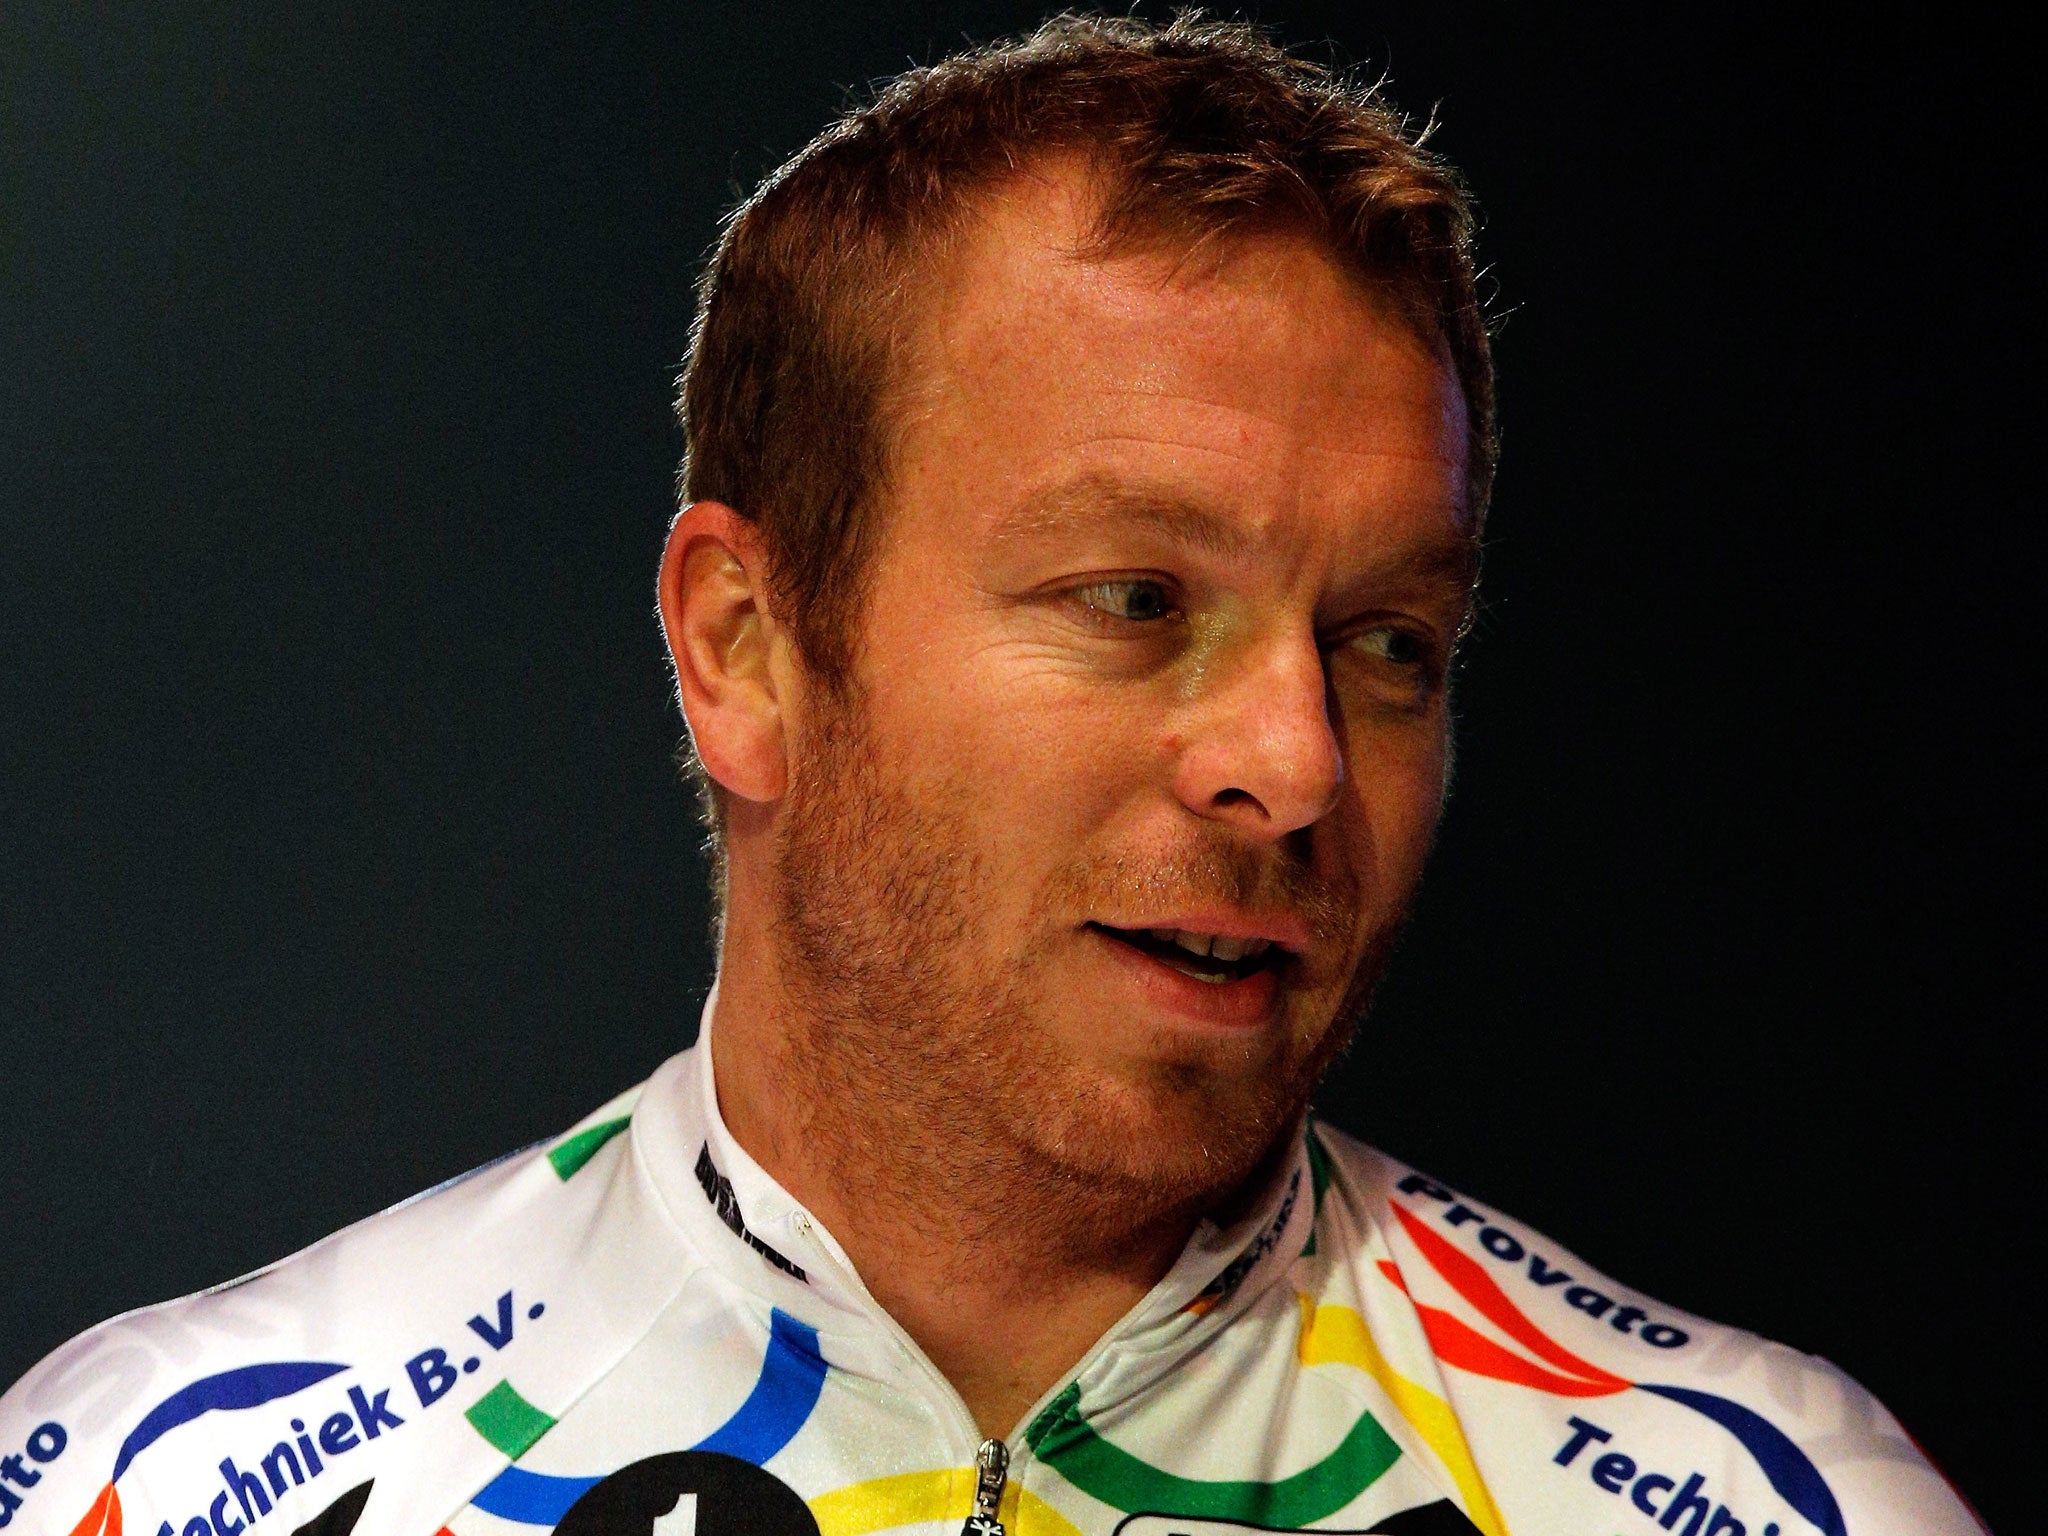 Sir Chris Hoy has called for more testing in cycling